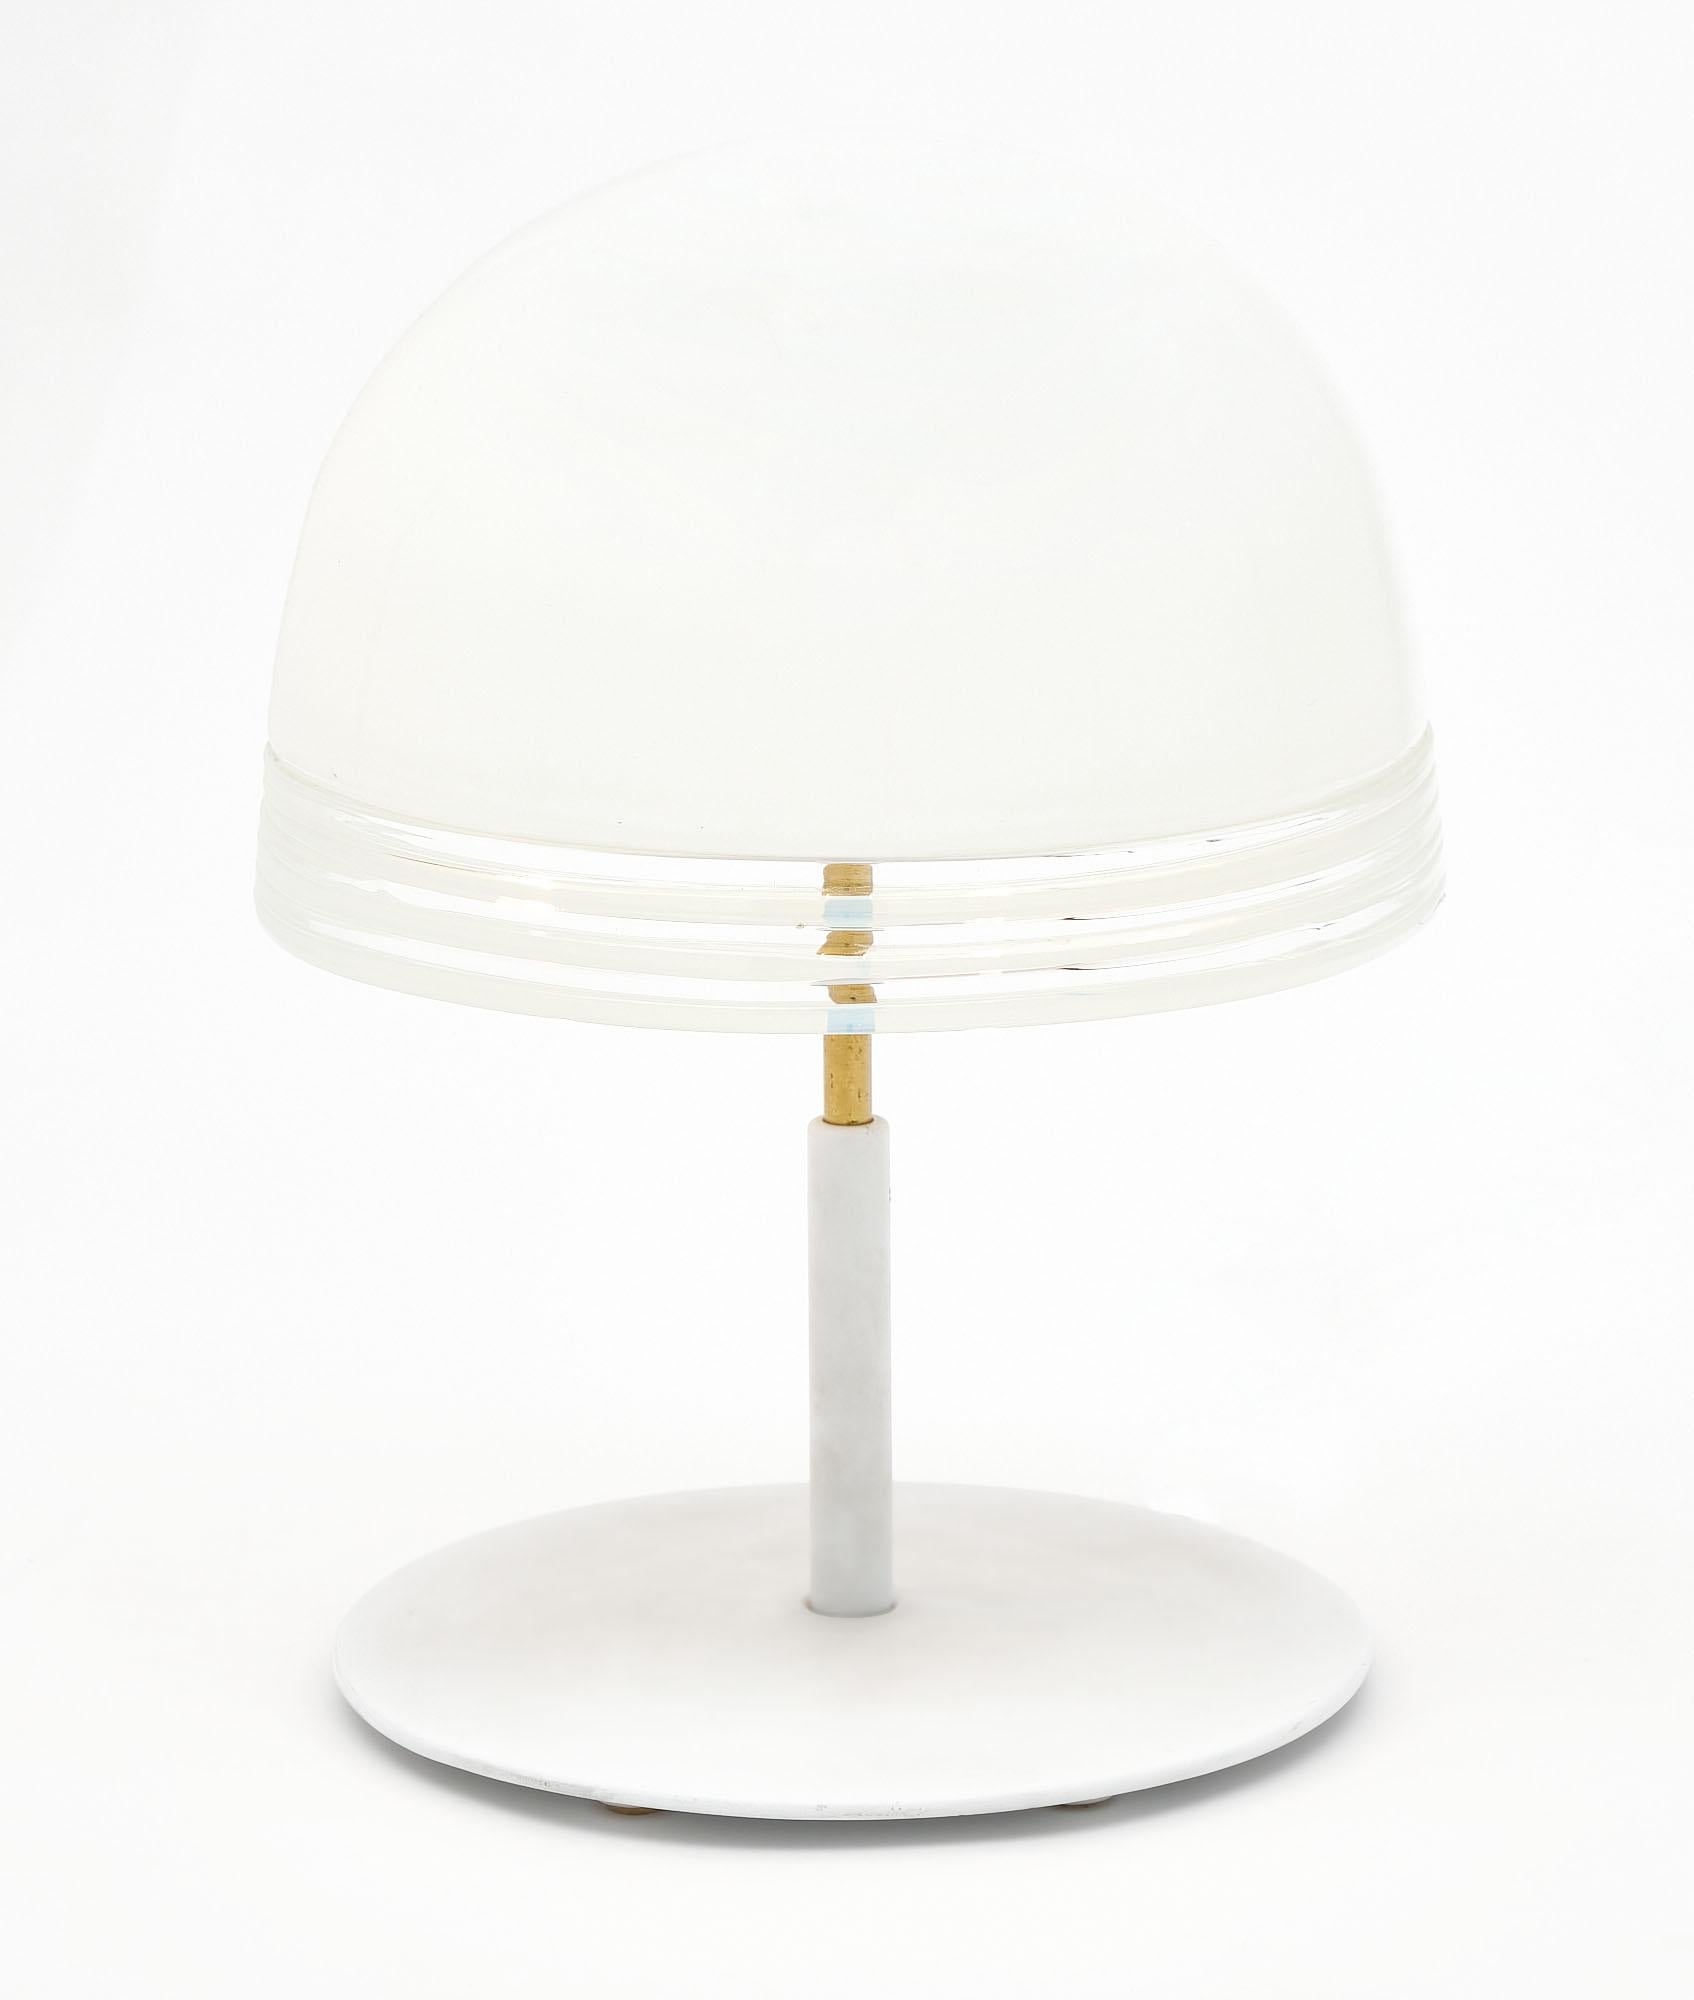 Lamp from Murano, Italy. This lamp presents a white lacquered base holding a brass stem supporting a white opalescent glass shade. It has been newly wired to fit US standards.